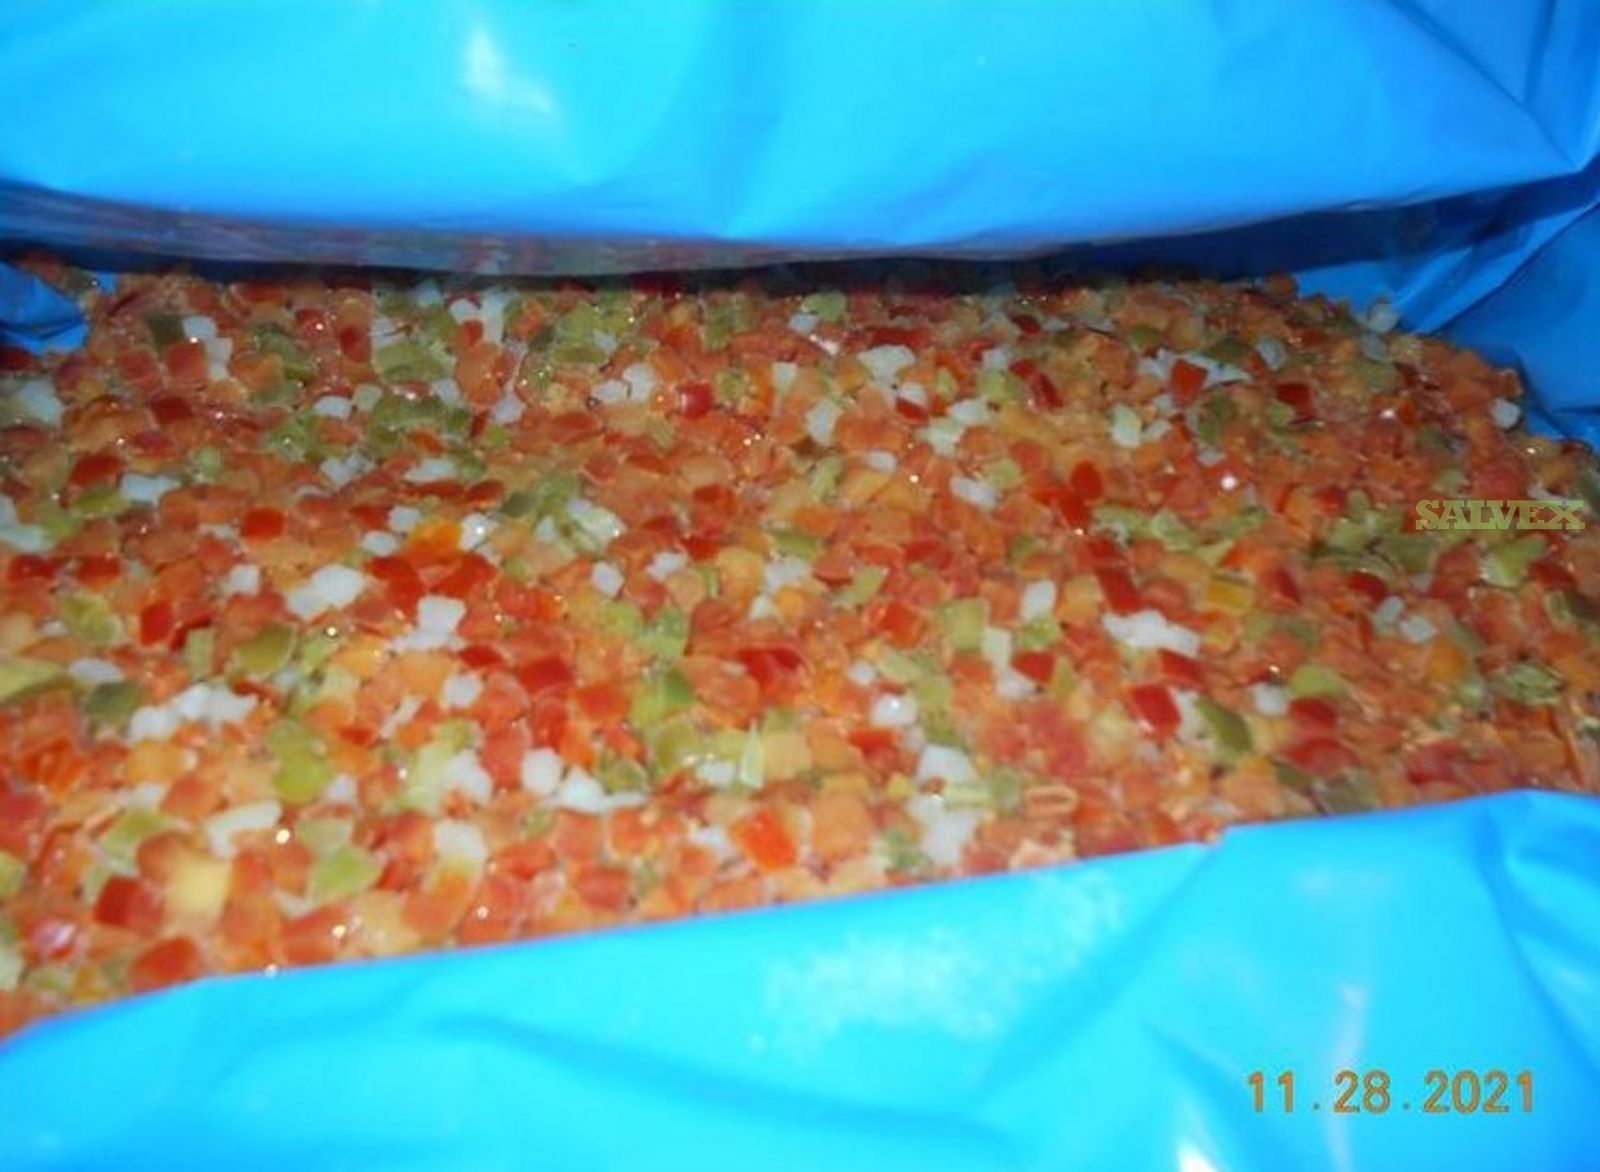 Frozen IQF Vegetable Blend - Product of Chile (10 containers) in Maryland